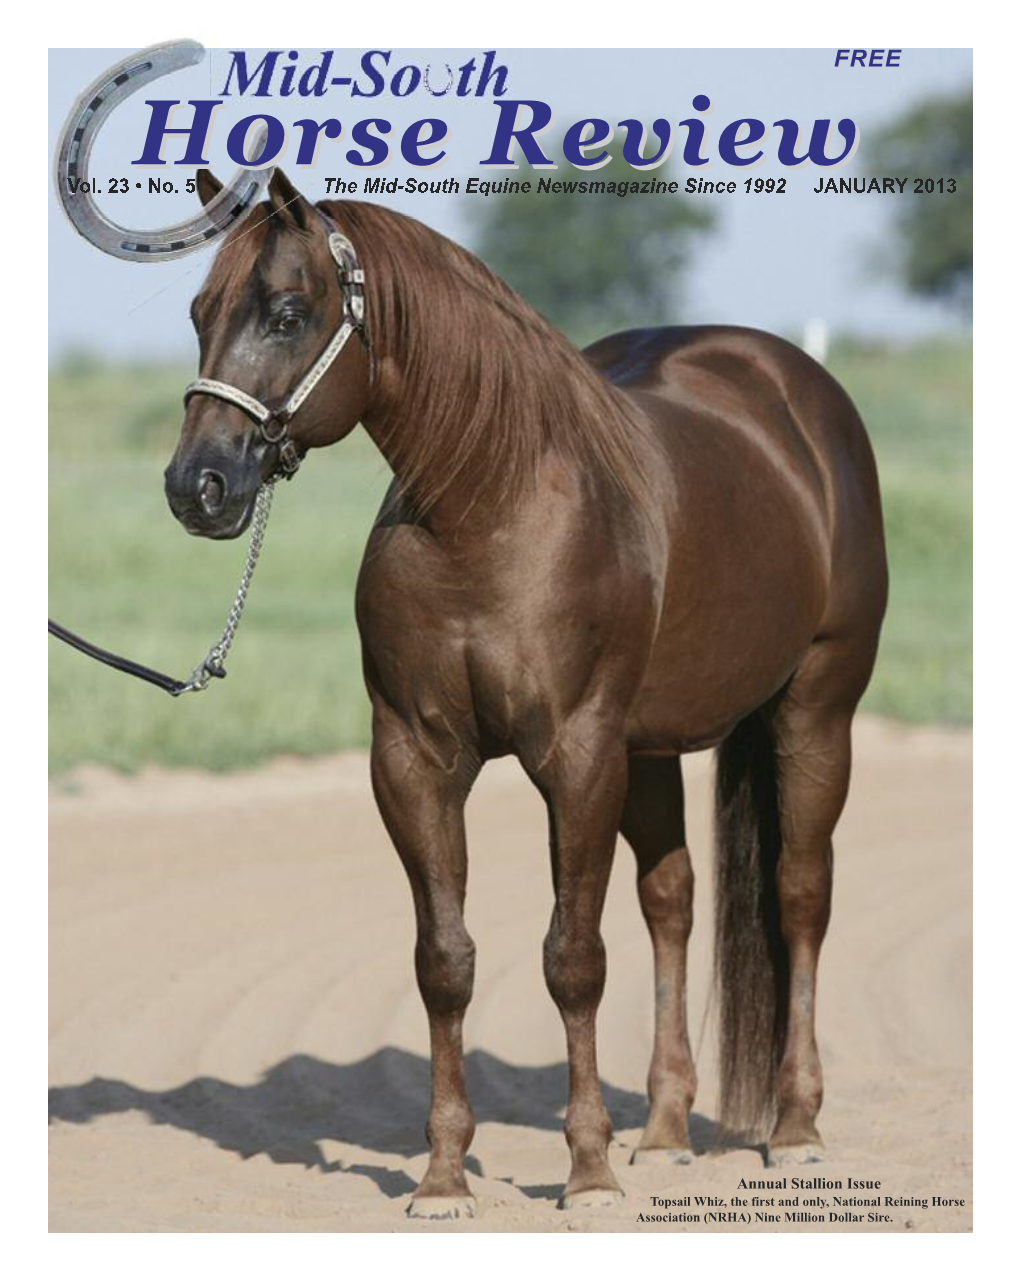 Vol. 23 • No. 5 the Mid-South Equine Newsmagazine Since 1992 JANUARY 2013